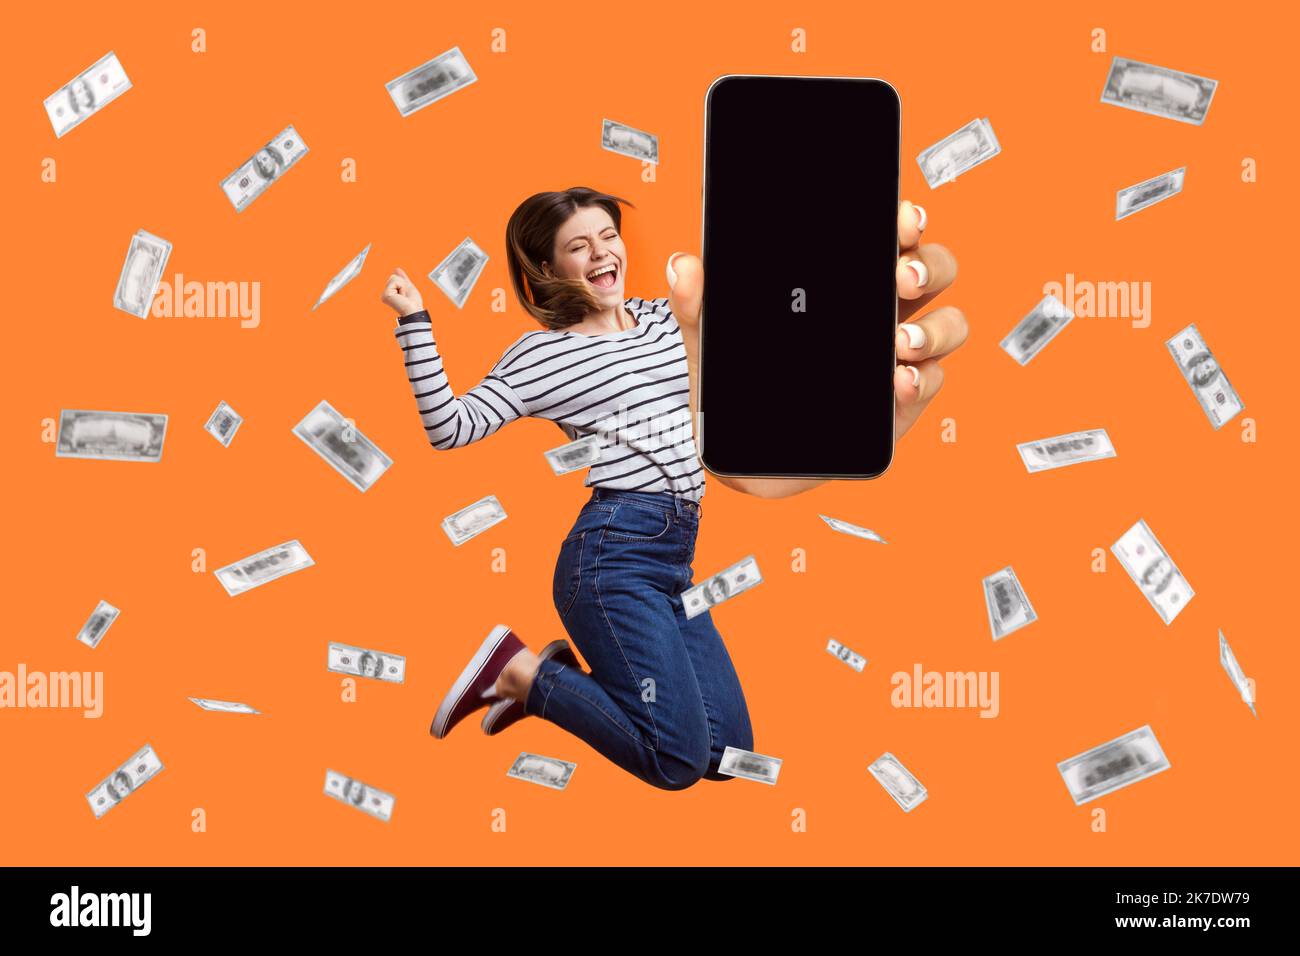 Portrait of extremely excited woman wearing striped shirt jumping in money rain showing phone display with advertisement area, betting and winning. Indoor studio shot isolated on orange background. Stock Photo